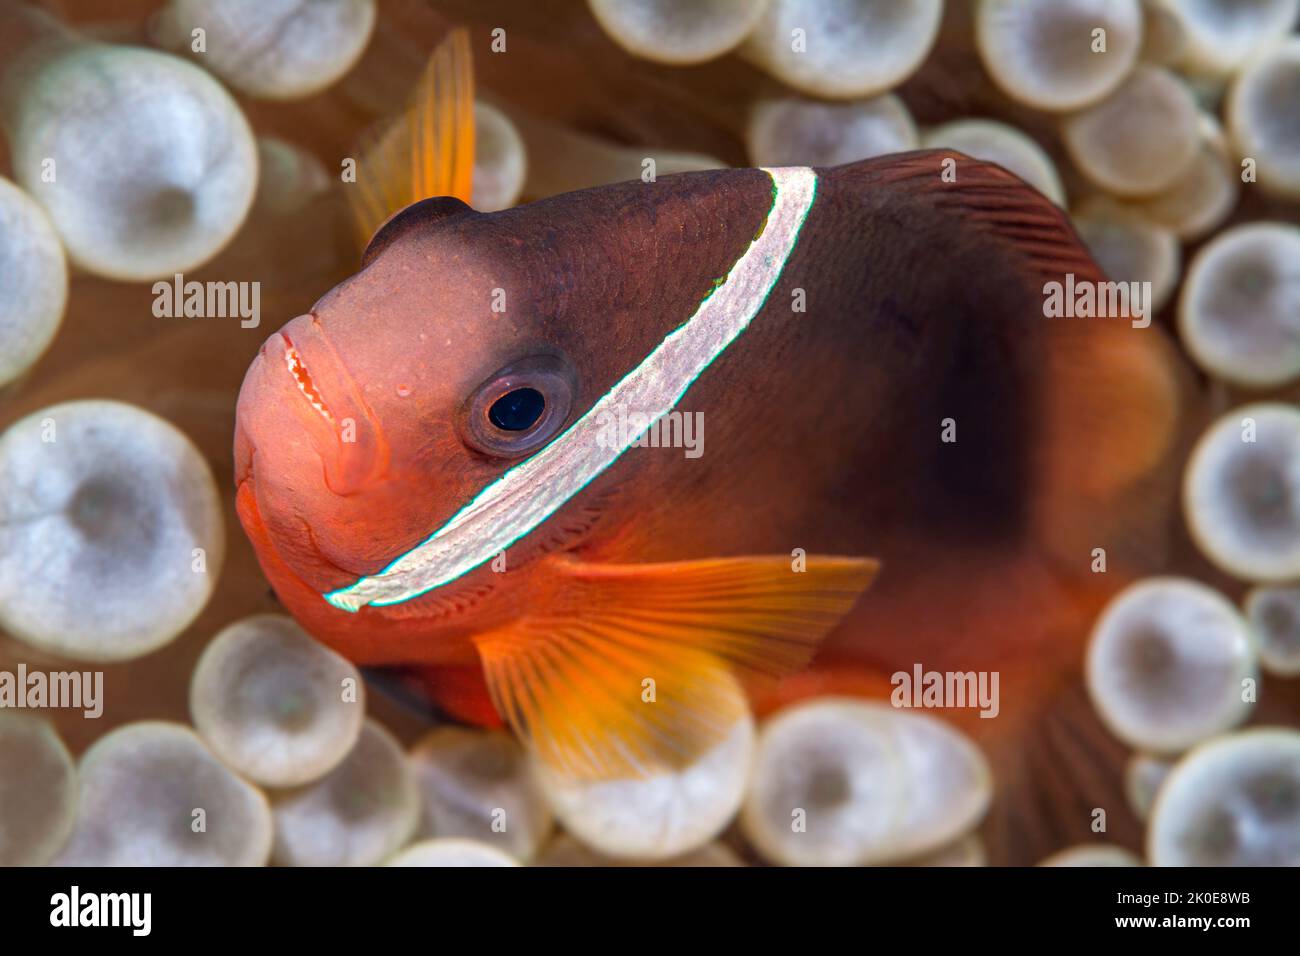 A small, orange tropical clownfish in Fiji swims within the protective tentacles of a host anemone with his mate following behind Stock Photo